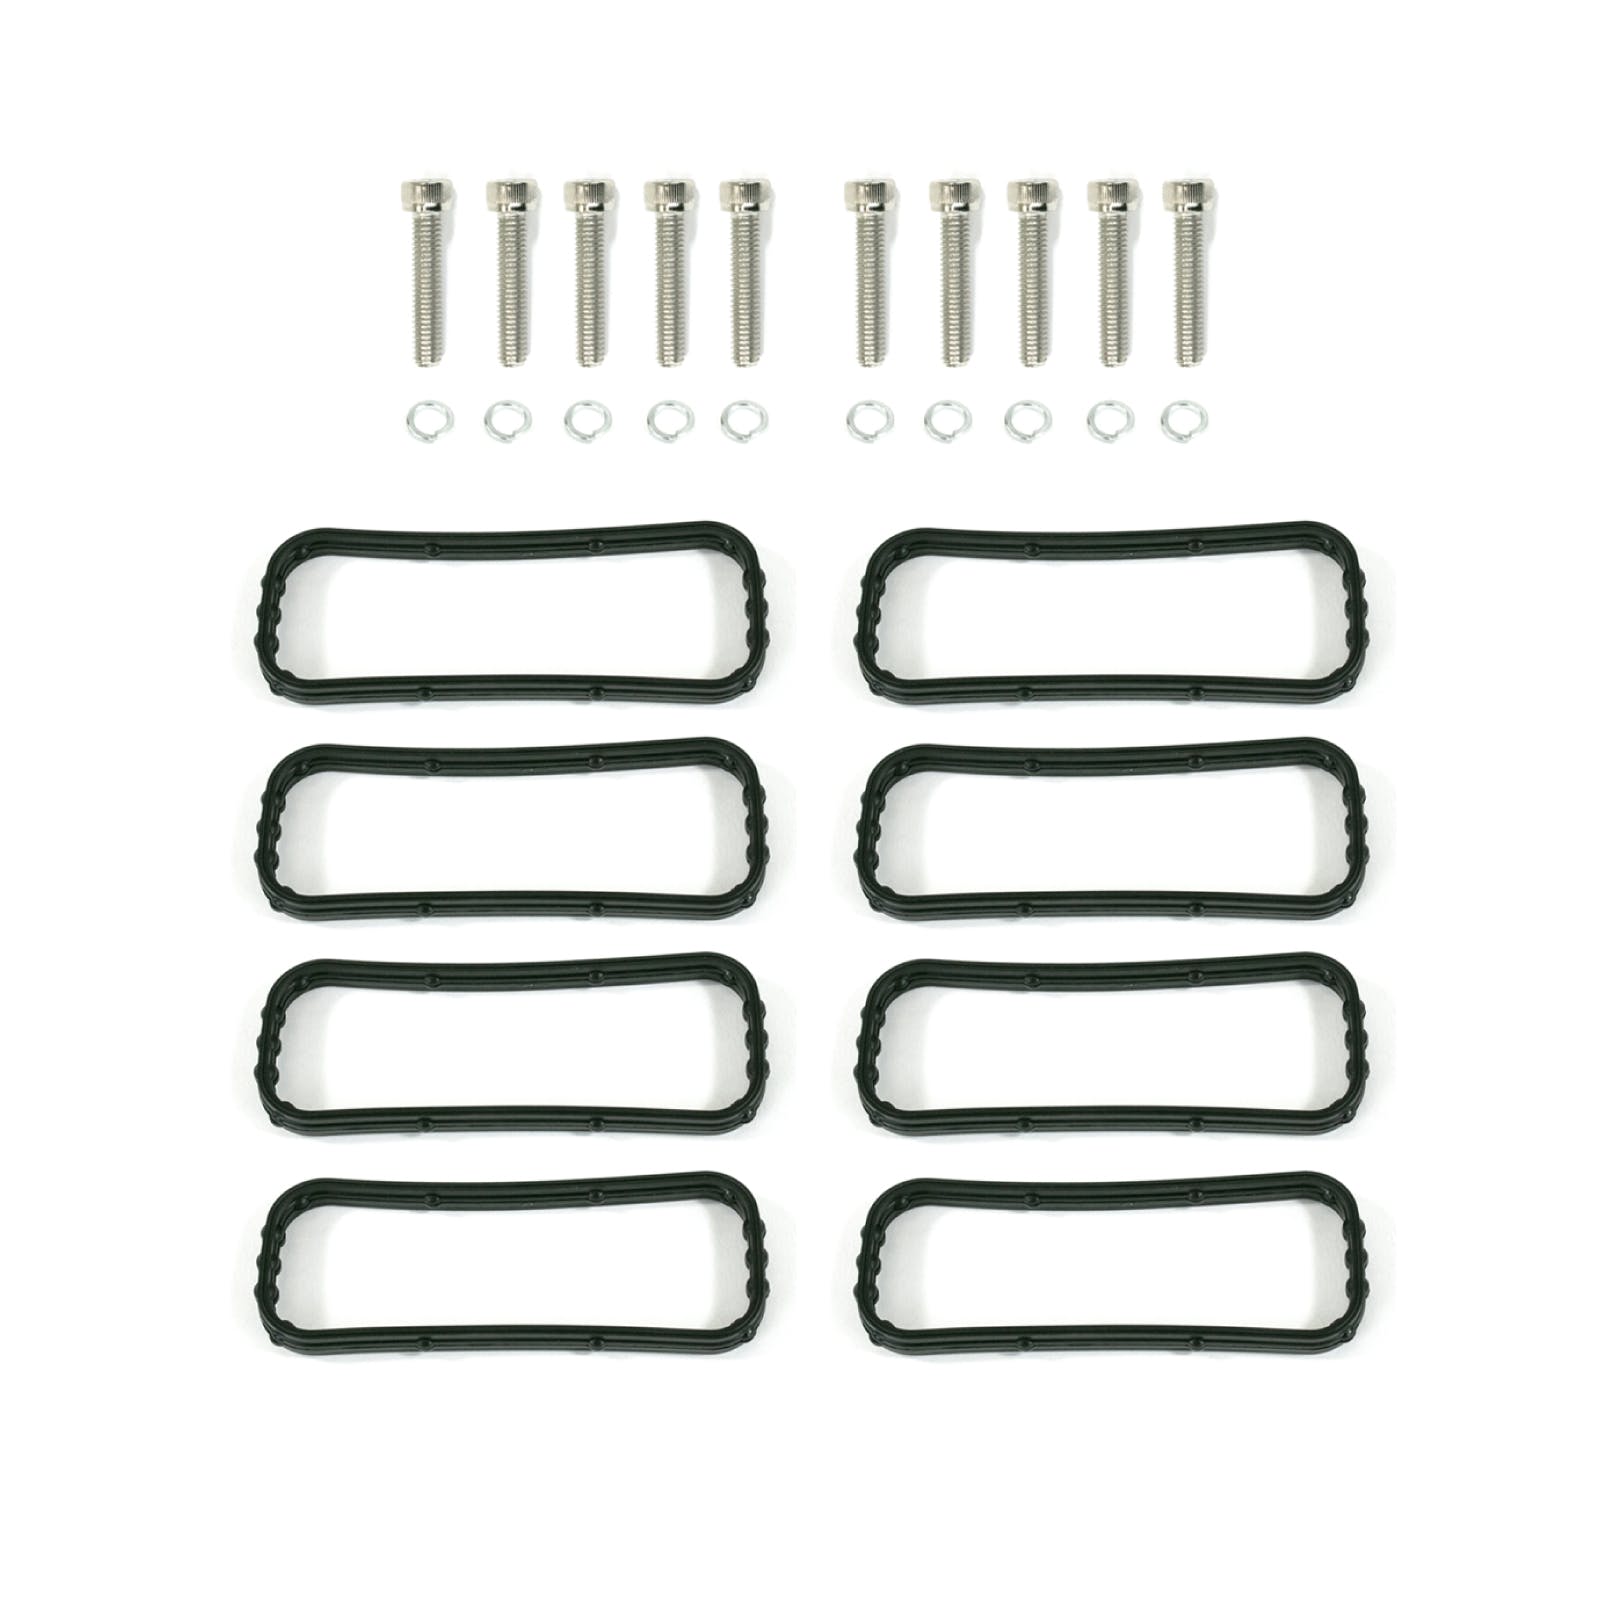 Top Street Performance 81701 LS1/LS2/LS6 Intake Manifold O-Ring Gaskets and Mounting Bolts Kit